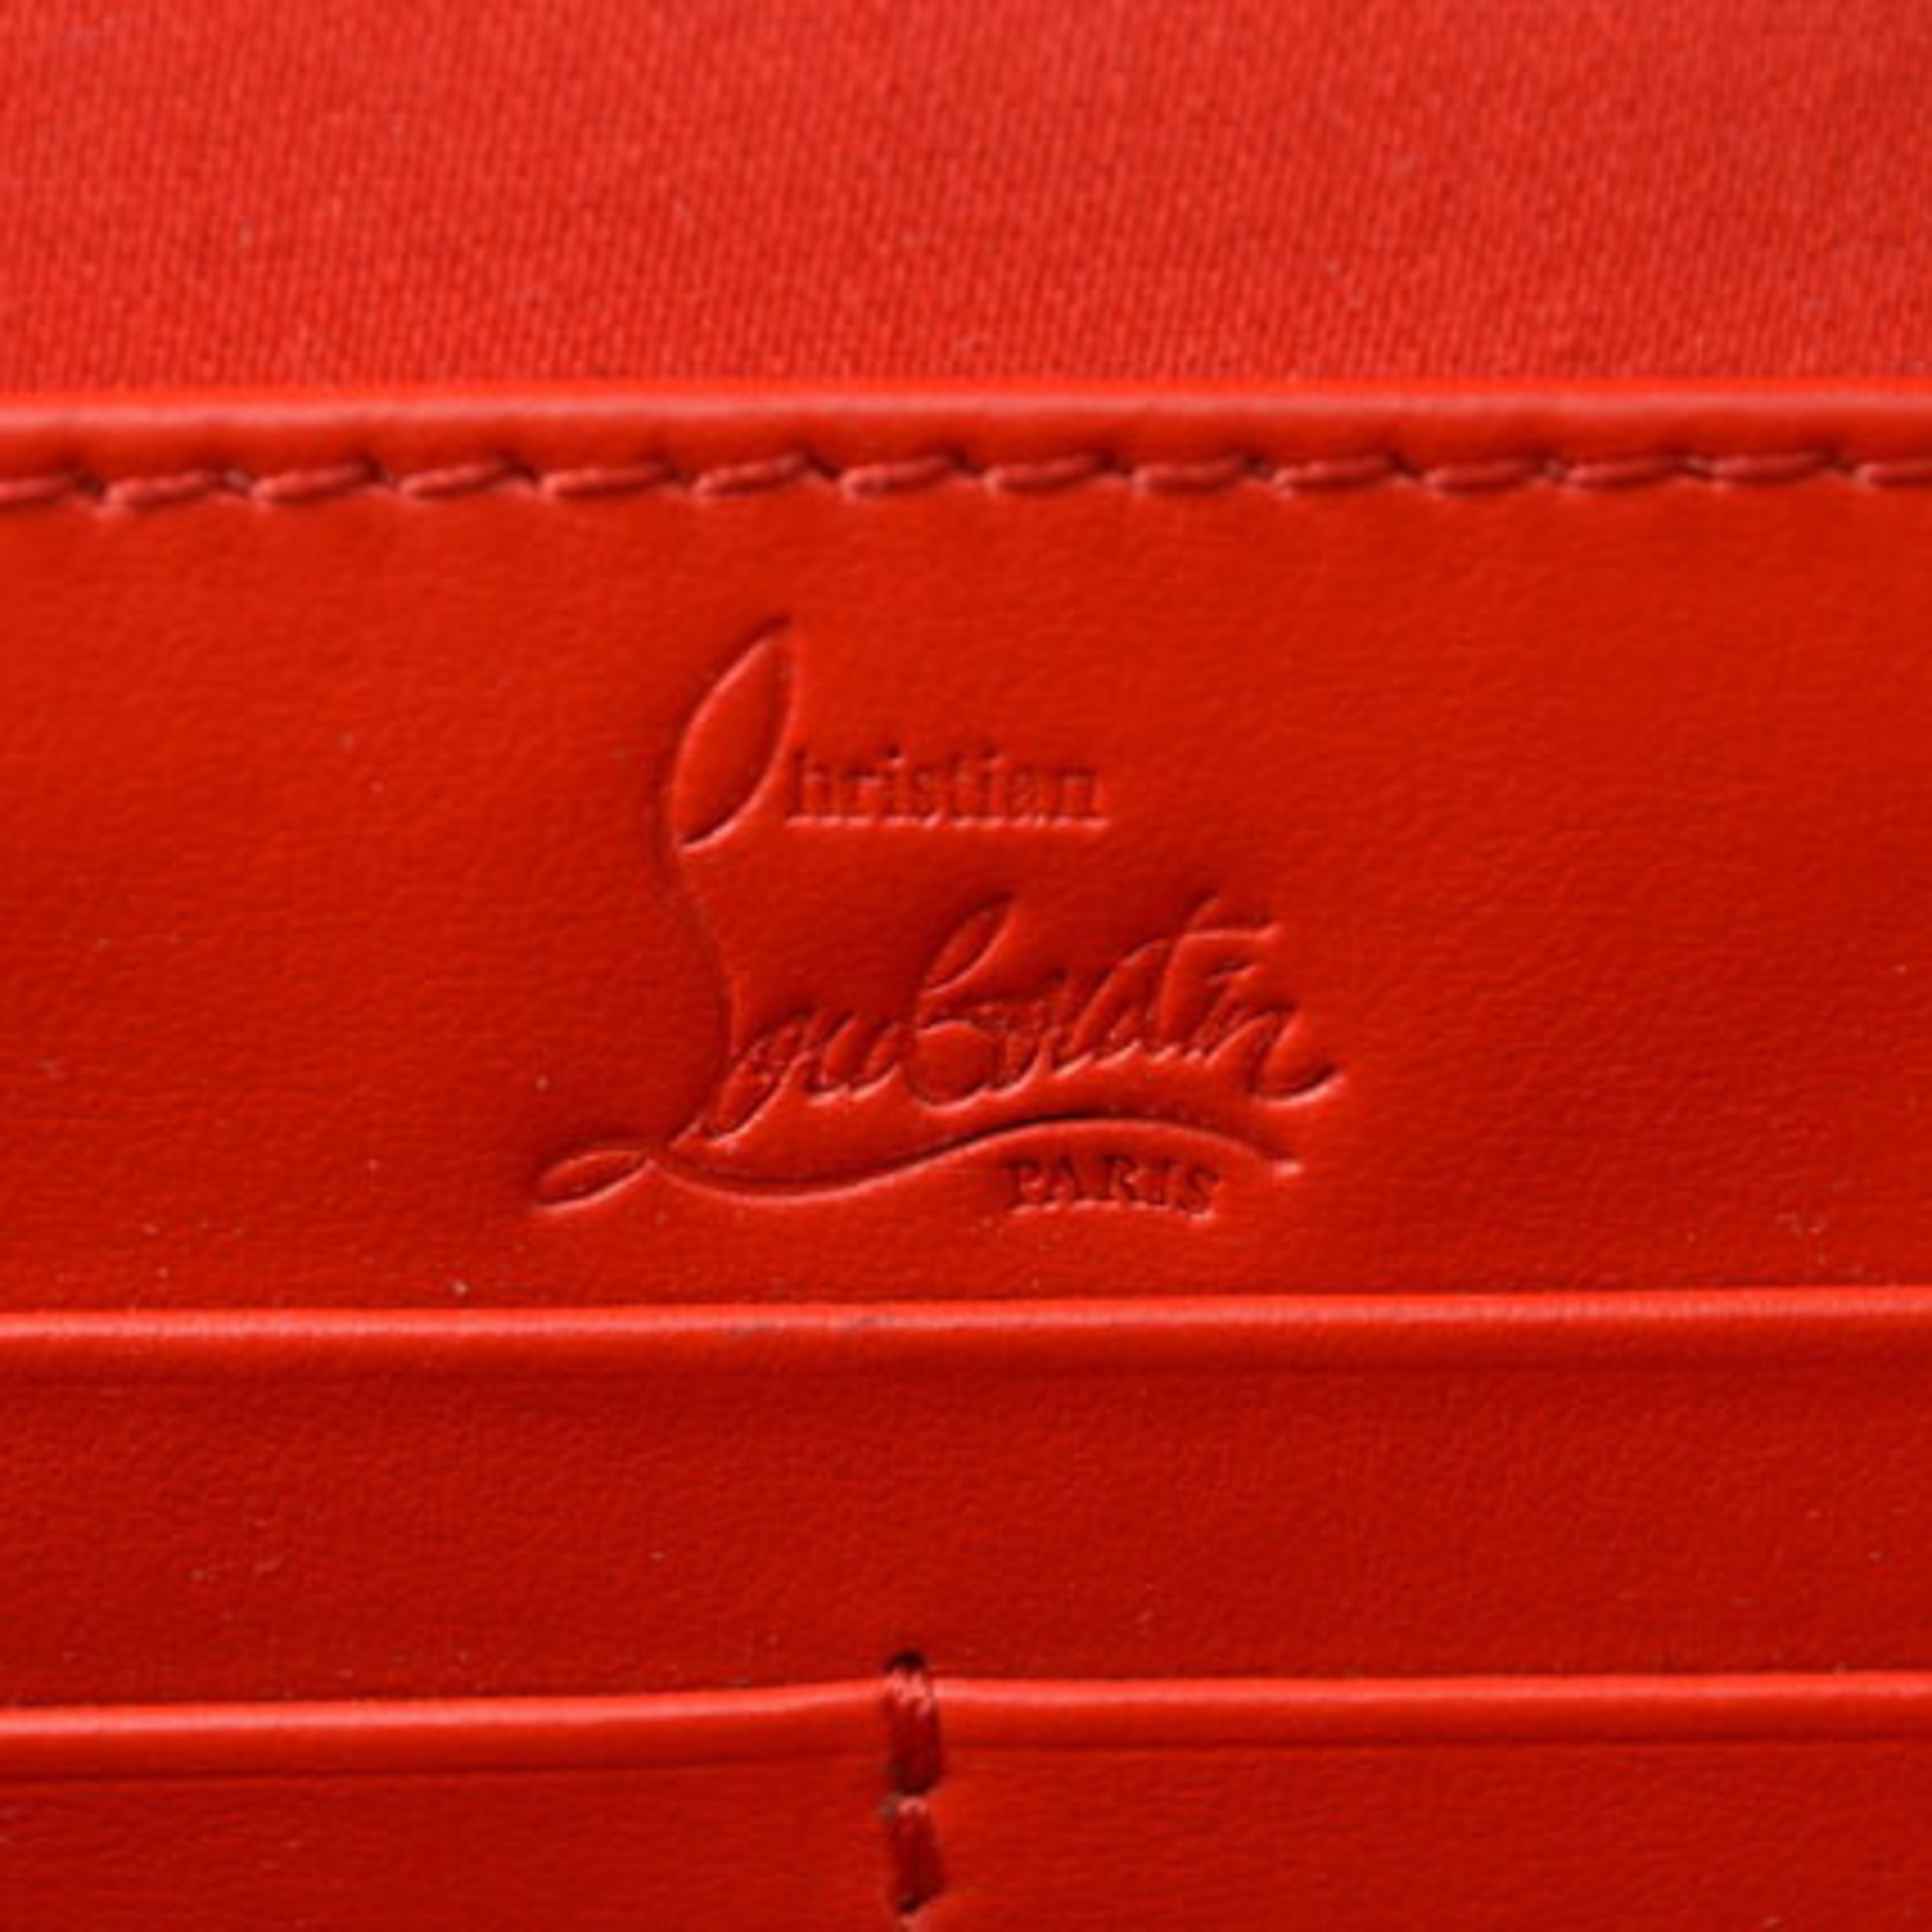 Christian Louboutin Handbag/Shoulder Bag 2way Kypipouch/Kipipouch Calf Navy/Red 1205265